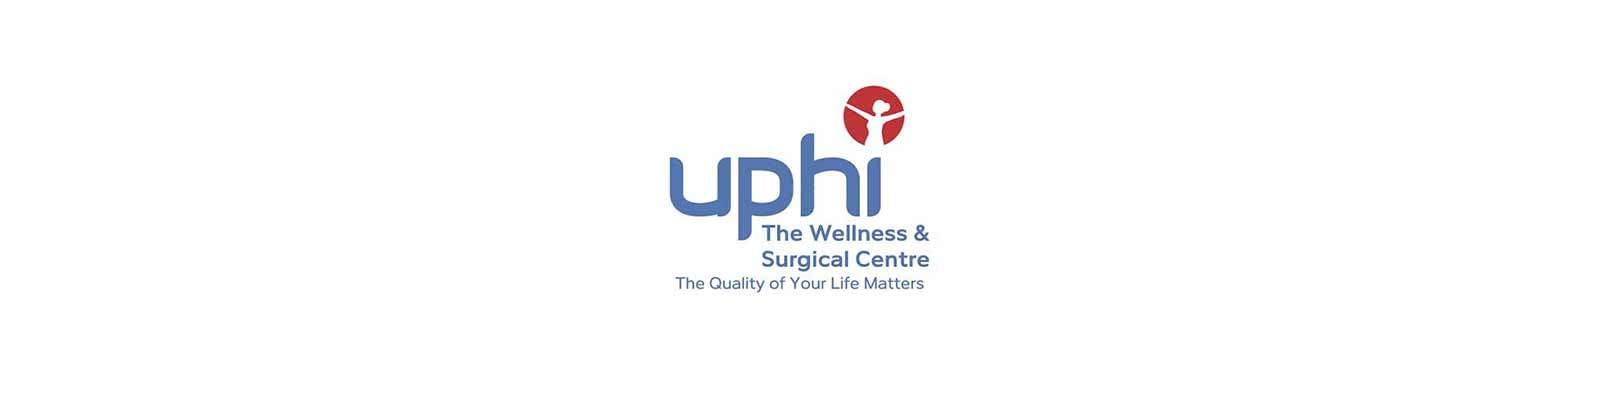 UPHI The Wellness And Surgical Centre